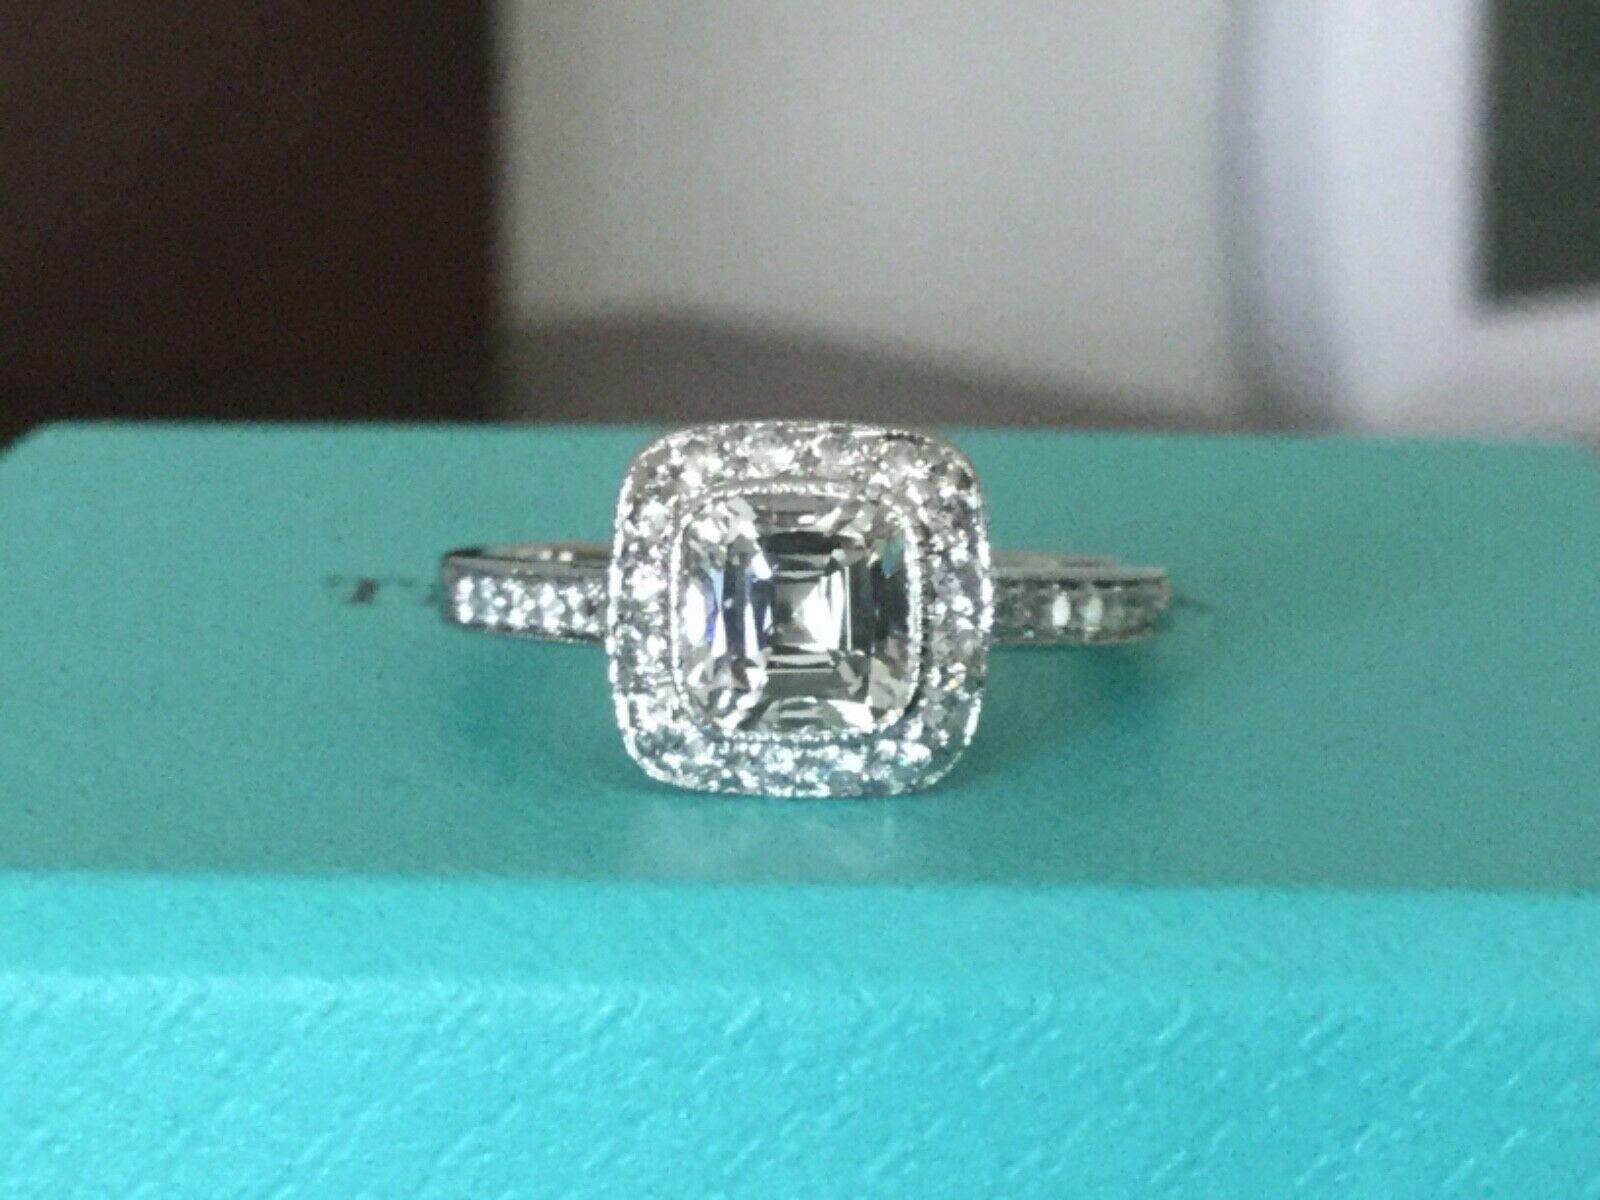 Being offered for your consideration is a like new Tiffany & Co Platinum and Diamond 1.02 carat (1.34 TOTAL CARAT WEIGHT) natural cushion cut diamond engagement ring set in the classic LEGACY pave diamond band..  This ring was hardly worn and can